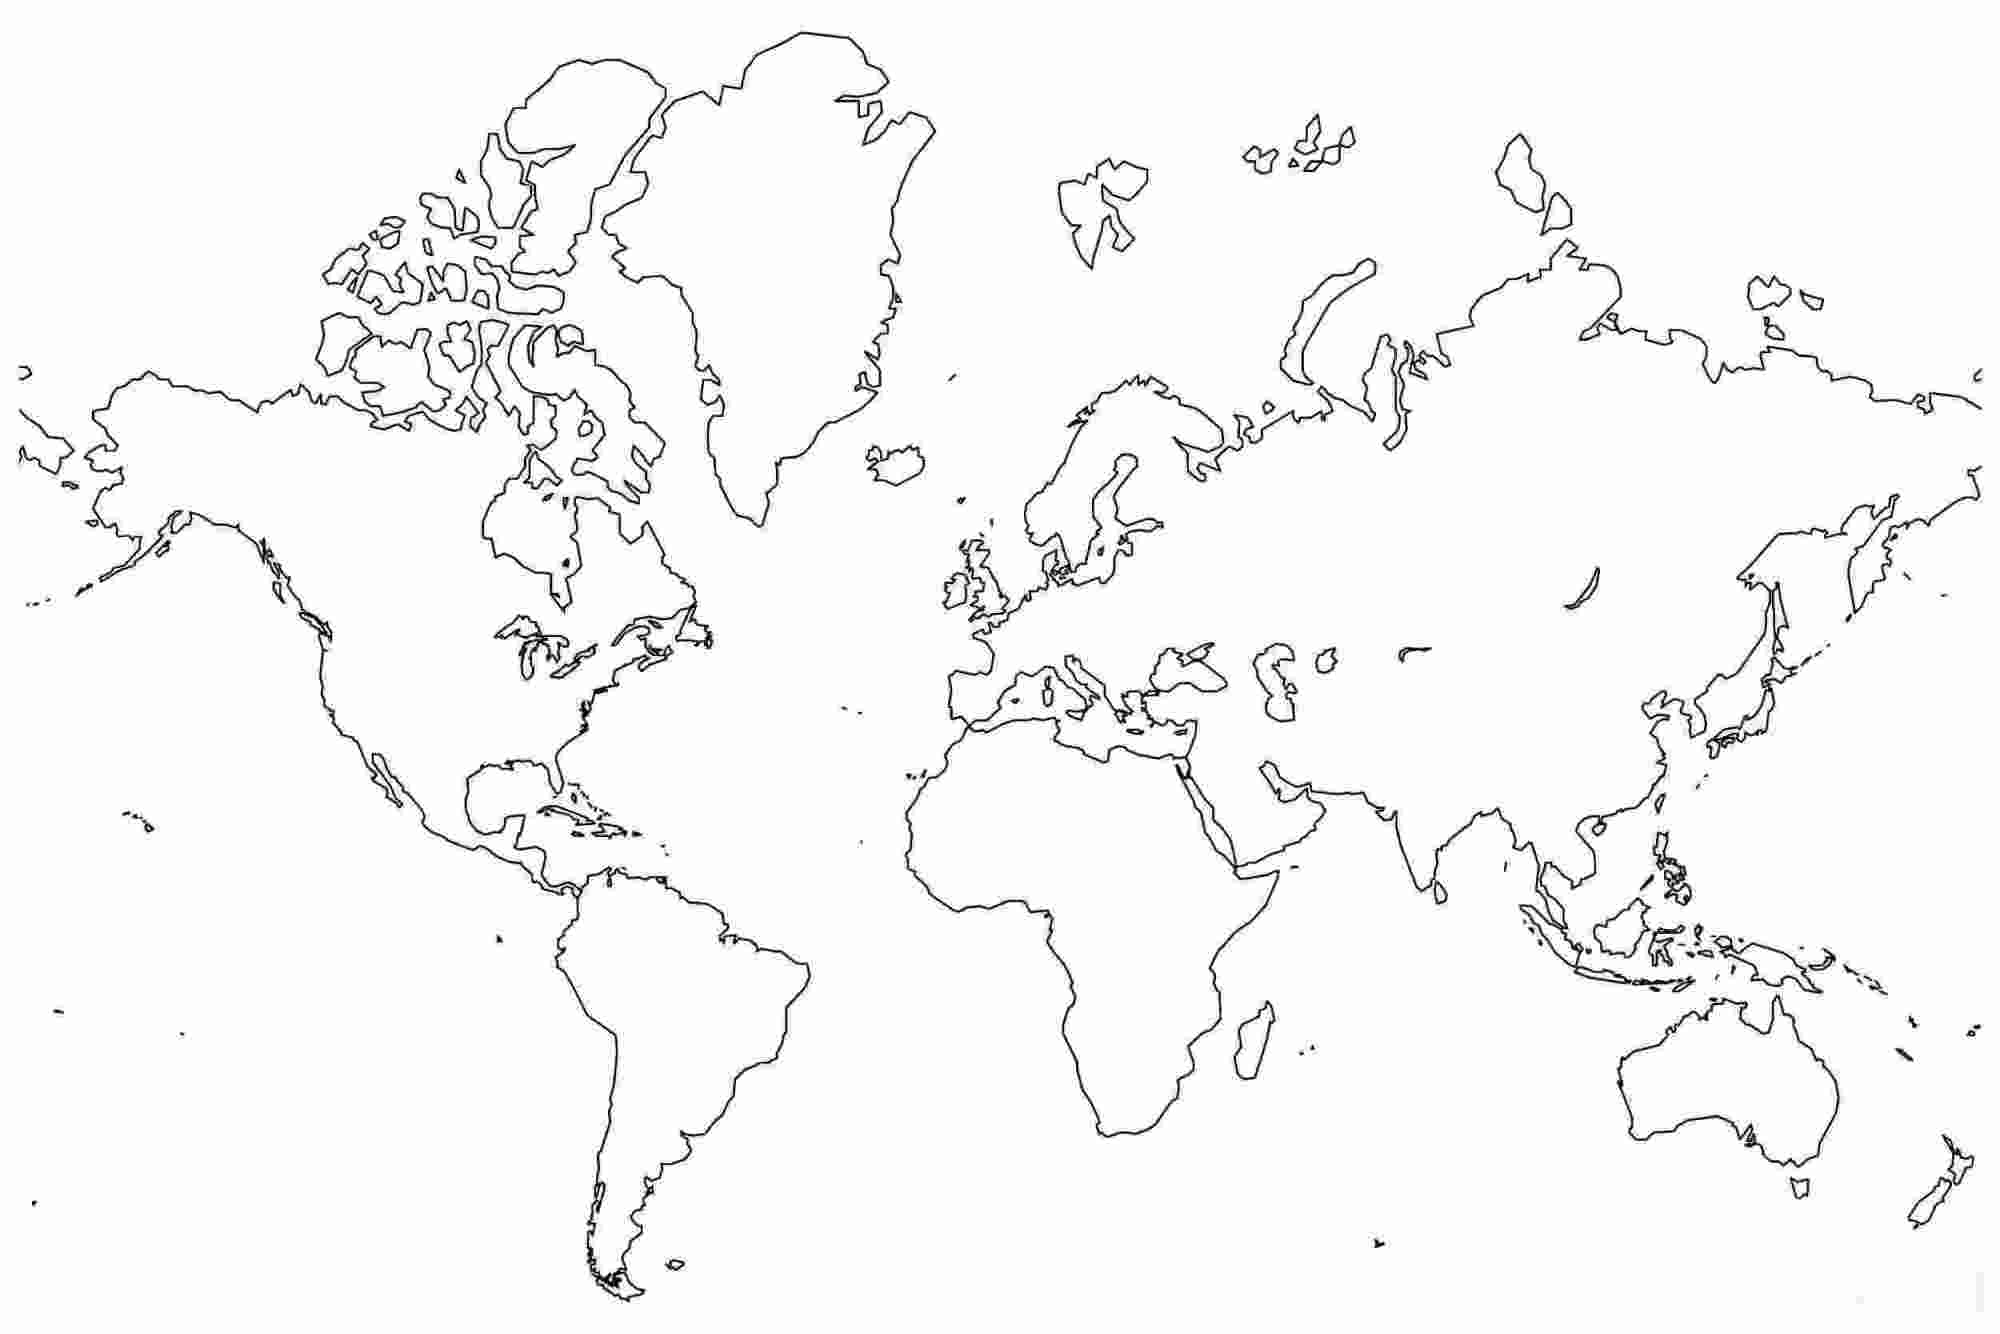 The blanks World Map for Preschoolers